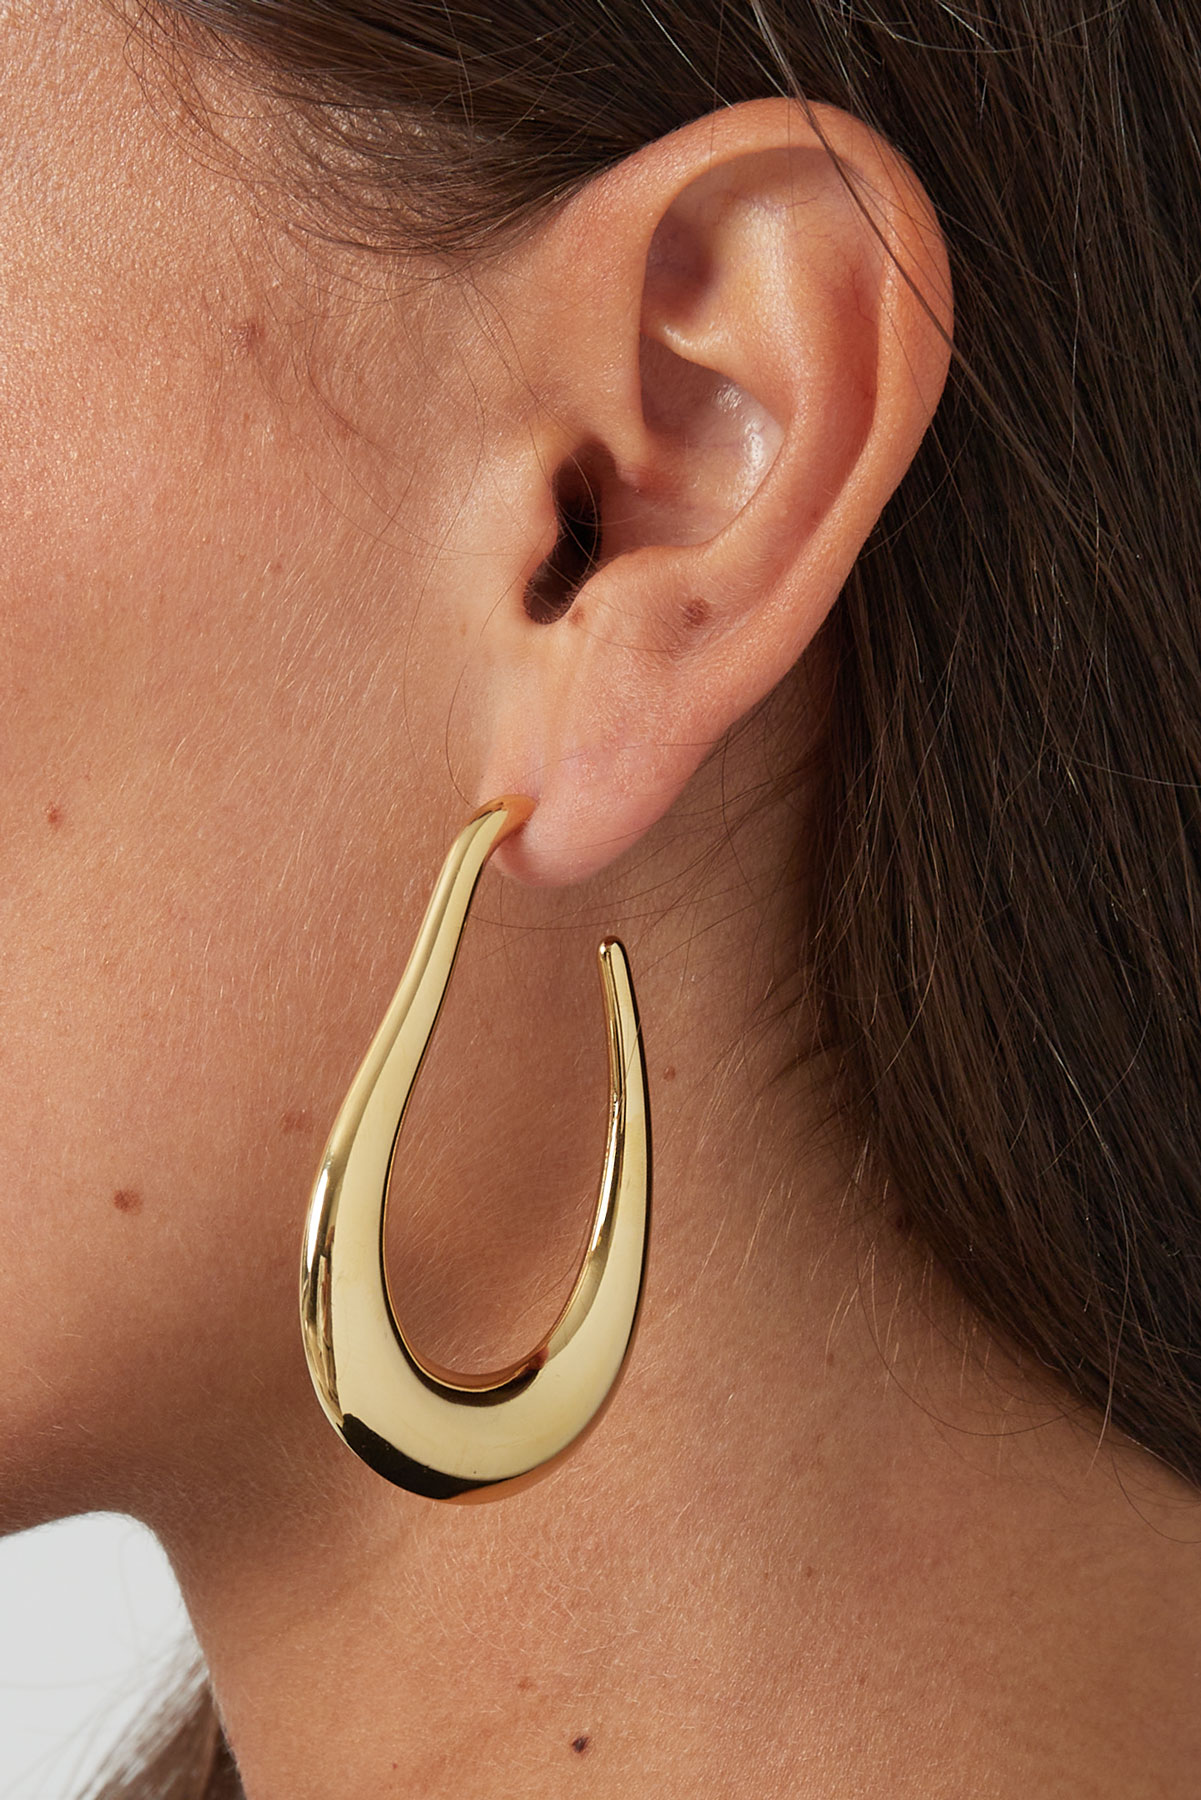 Asymmetrical earrings - gold h5 Picture3